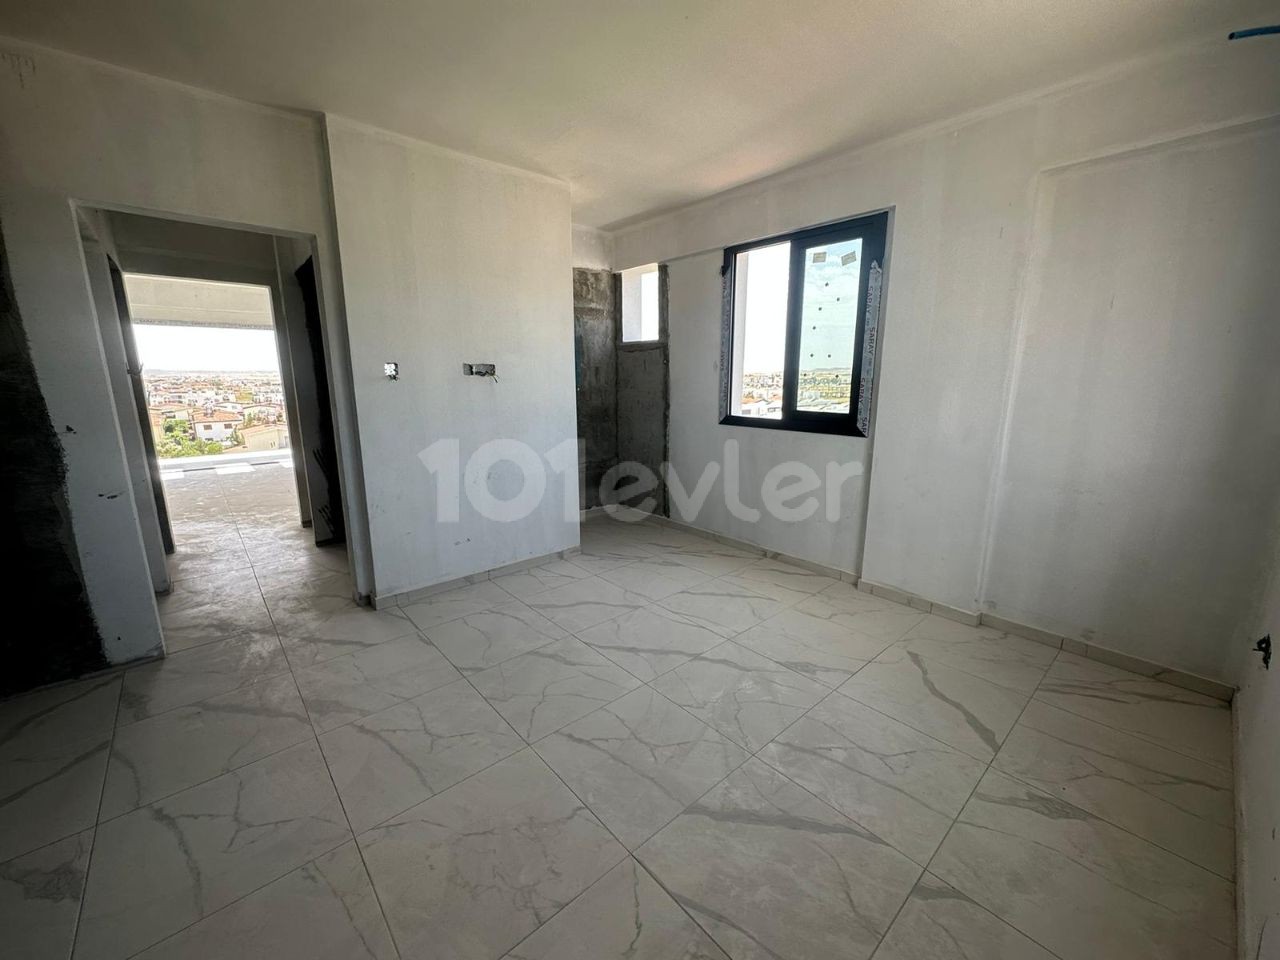 3+1 and 2+1 125m2 apartments for sale in Gonyeli